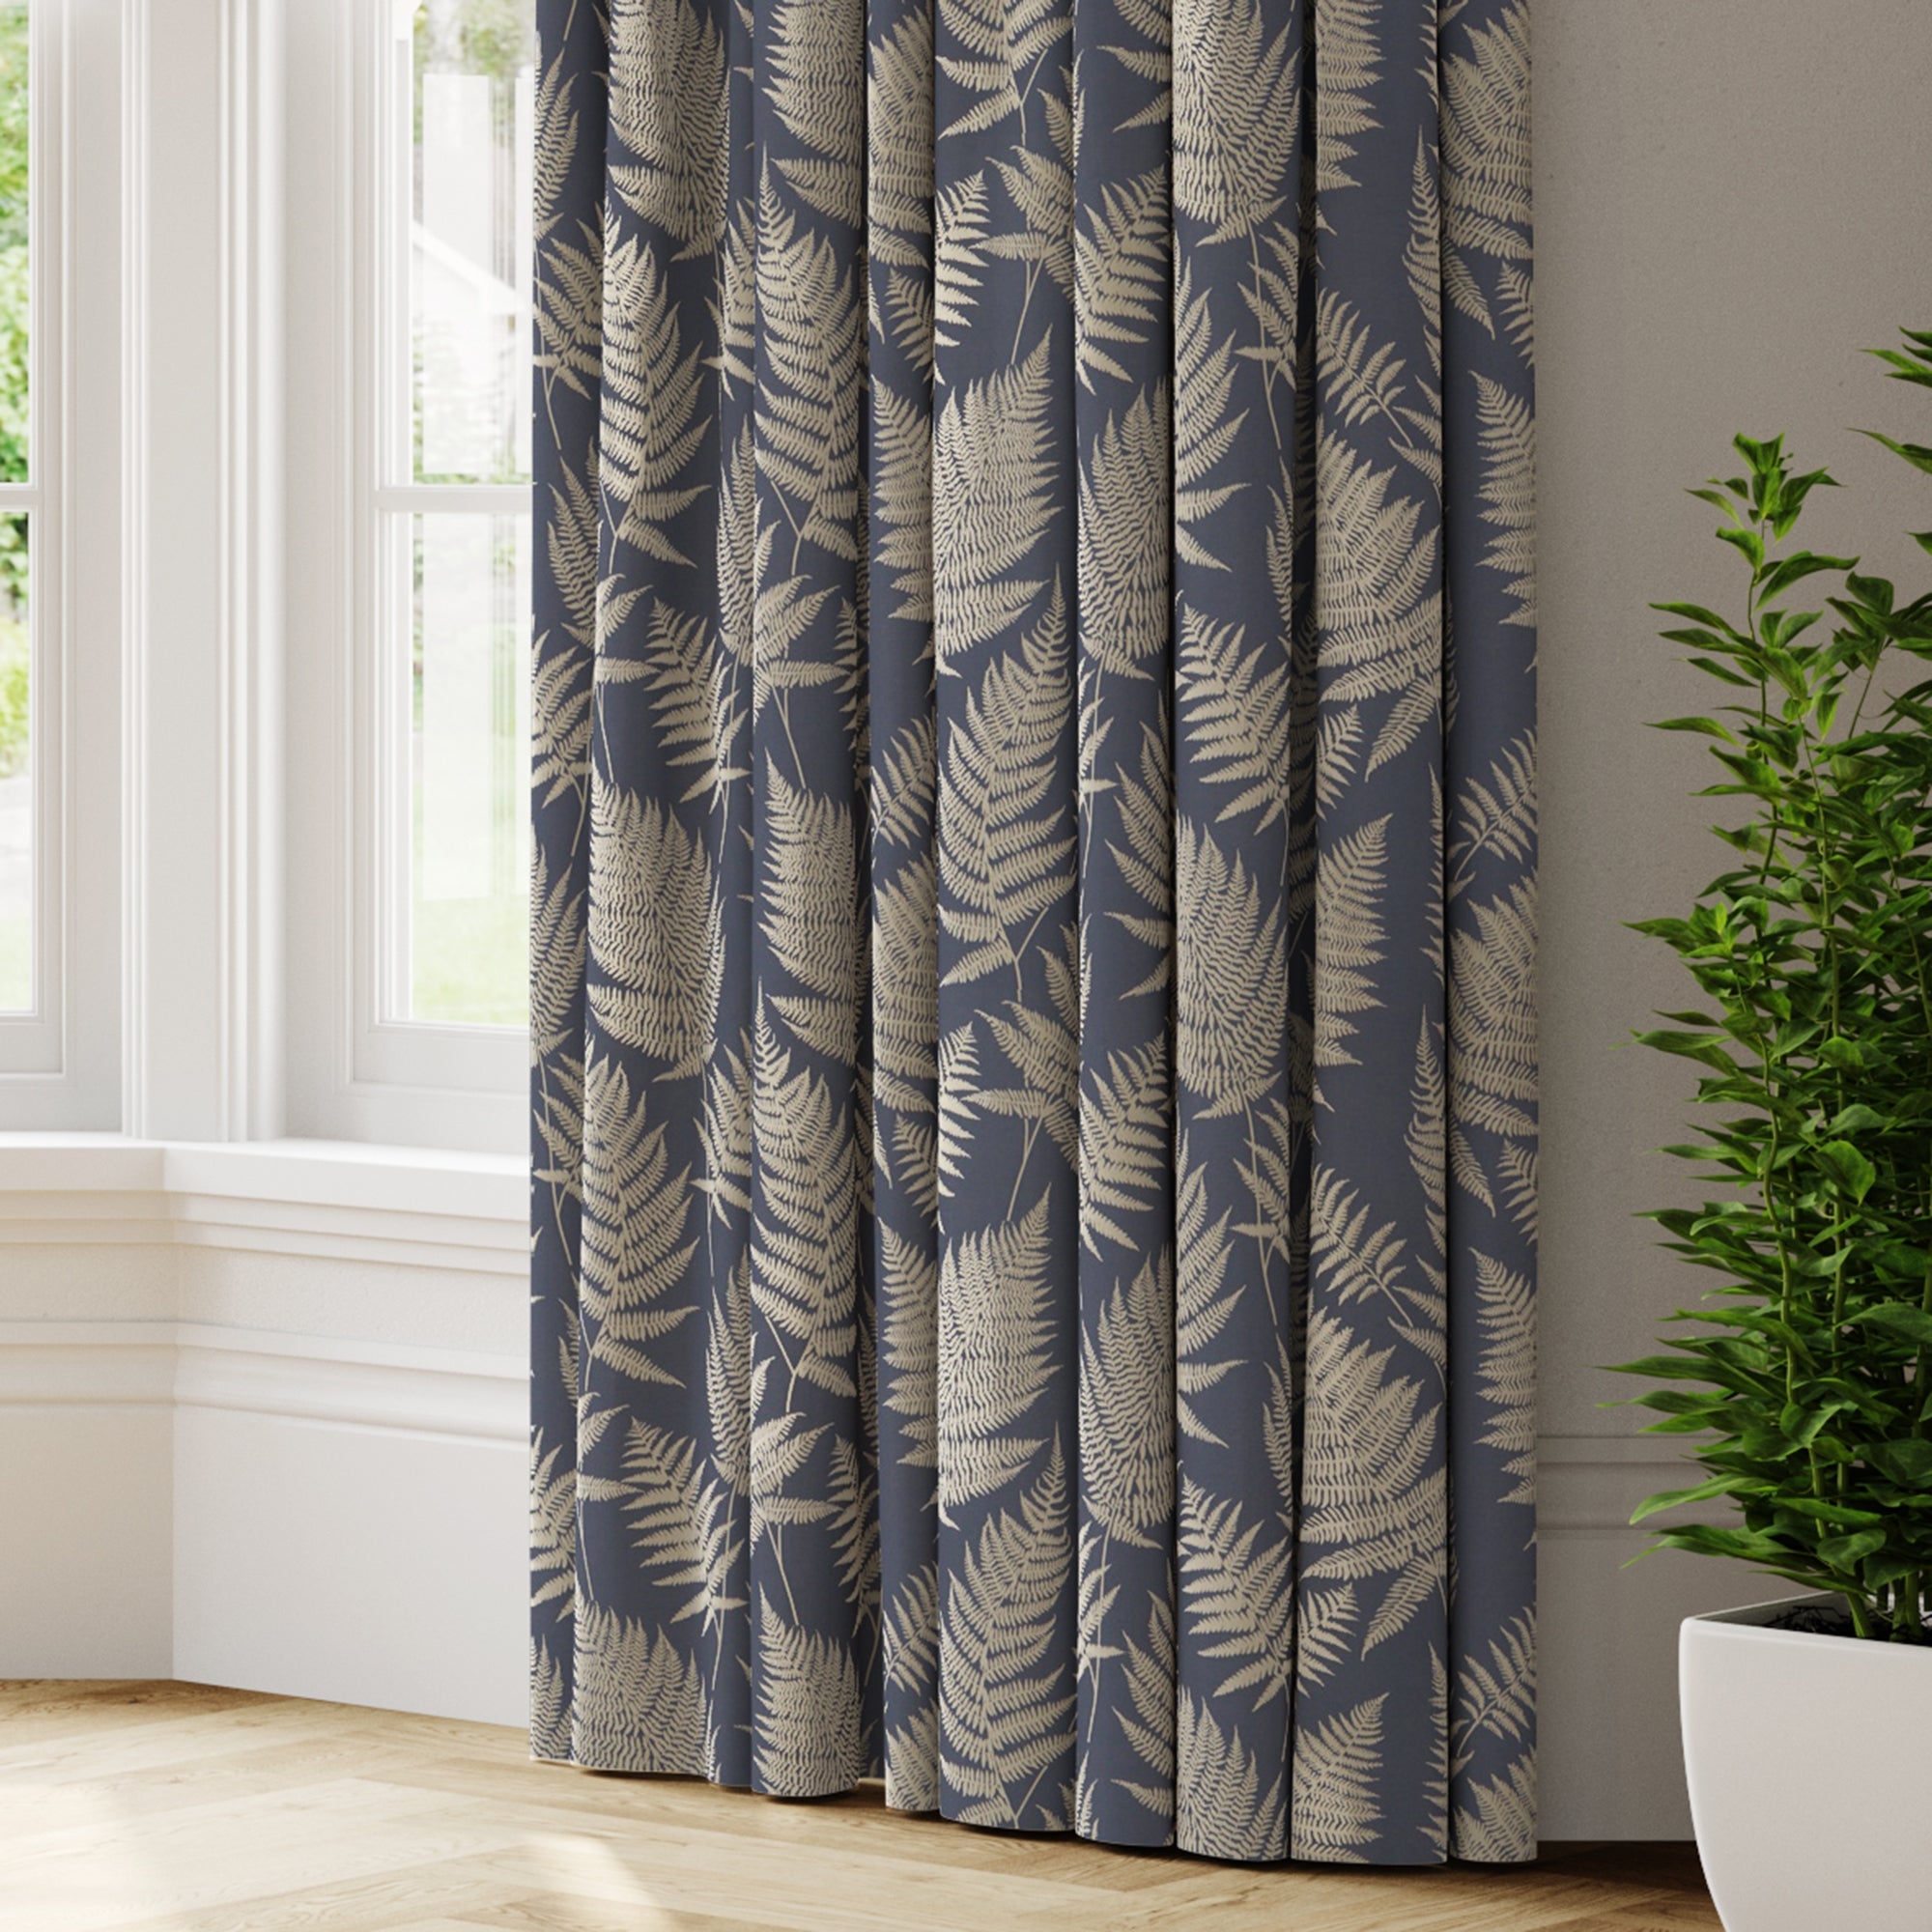 Affinis Made to Measure Curtains Affinis Danube